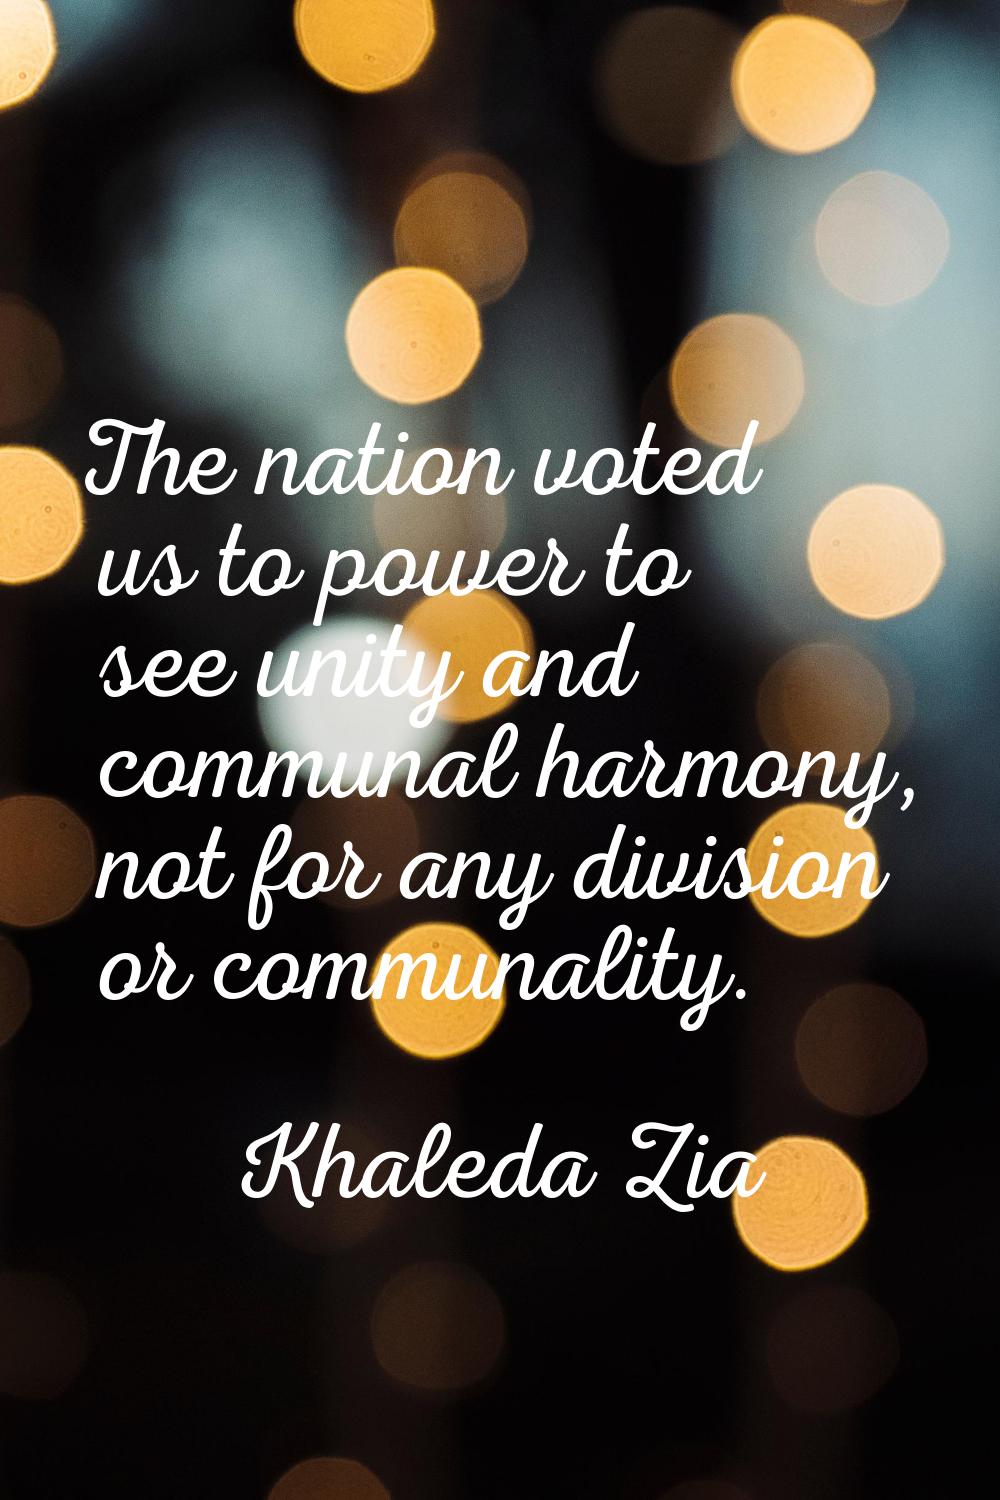 The nation voted us to power to see unity and communal harmony, not for any division or communality